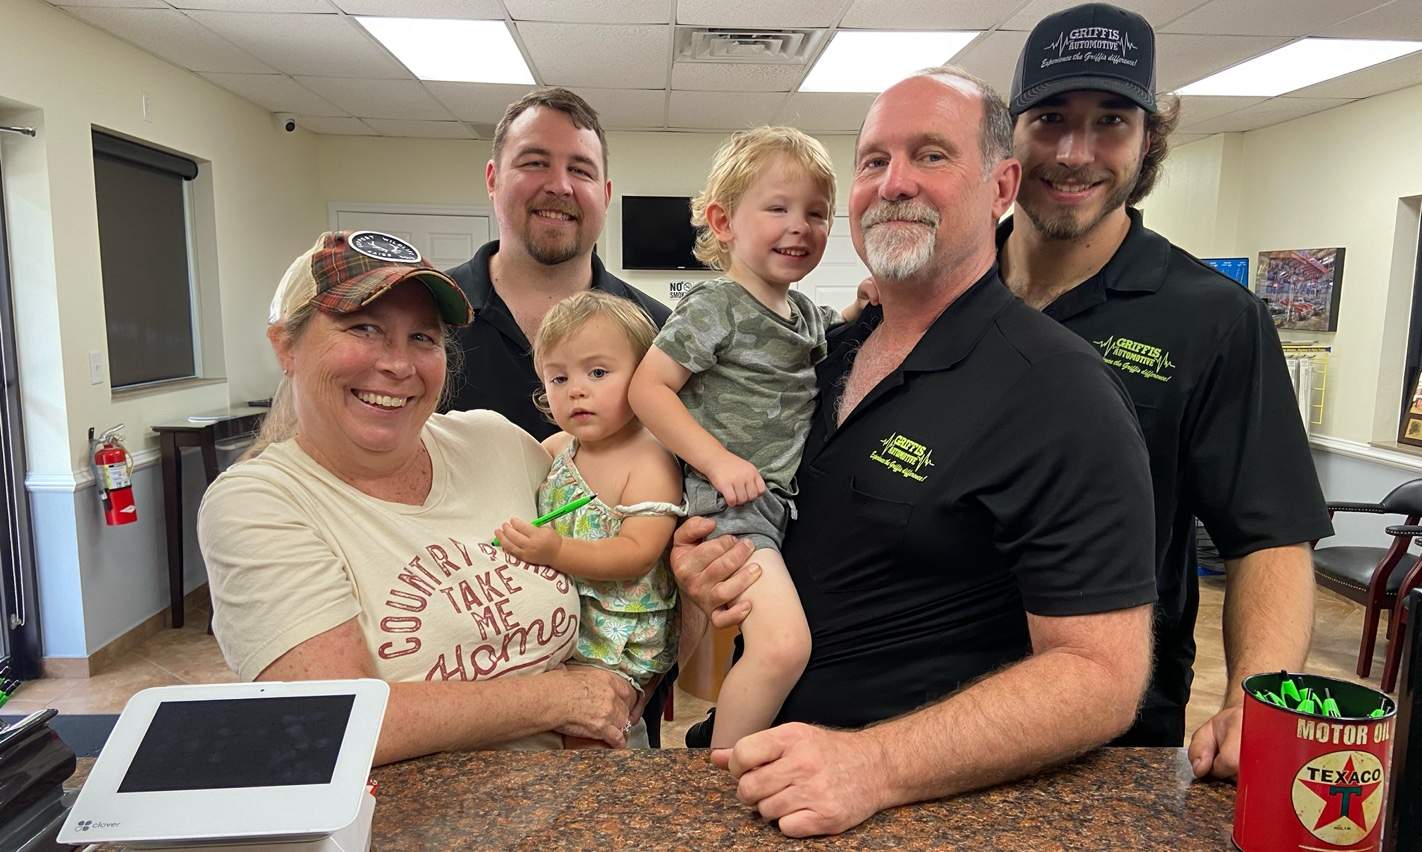 Team members and owners of Griffis Automotive Clinic pose for a photo in the shop office with 2 babies